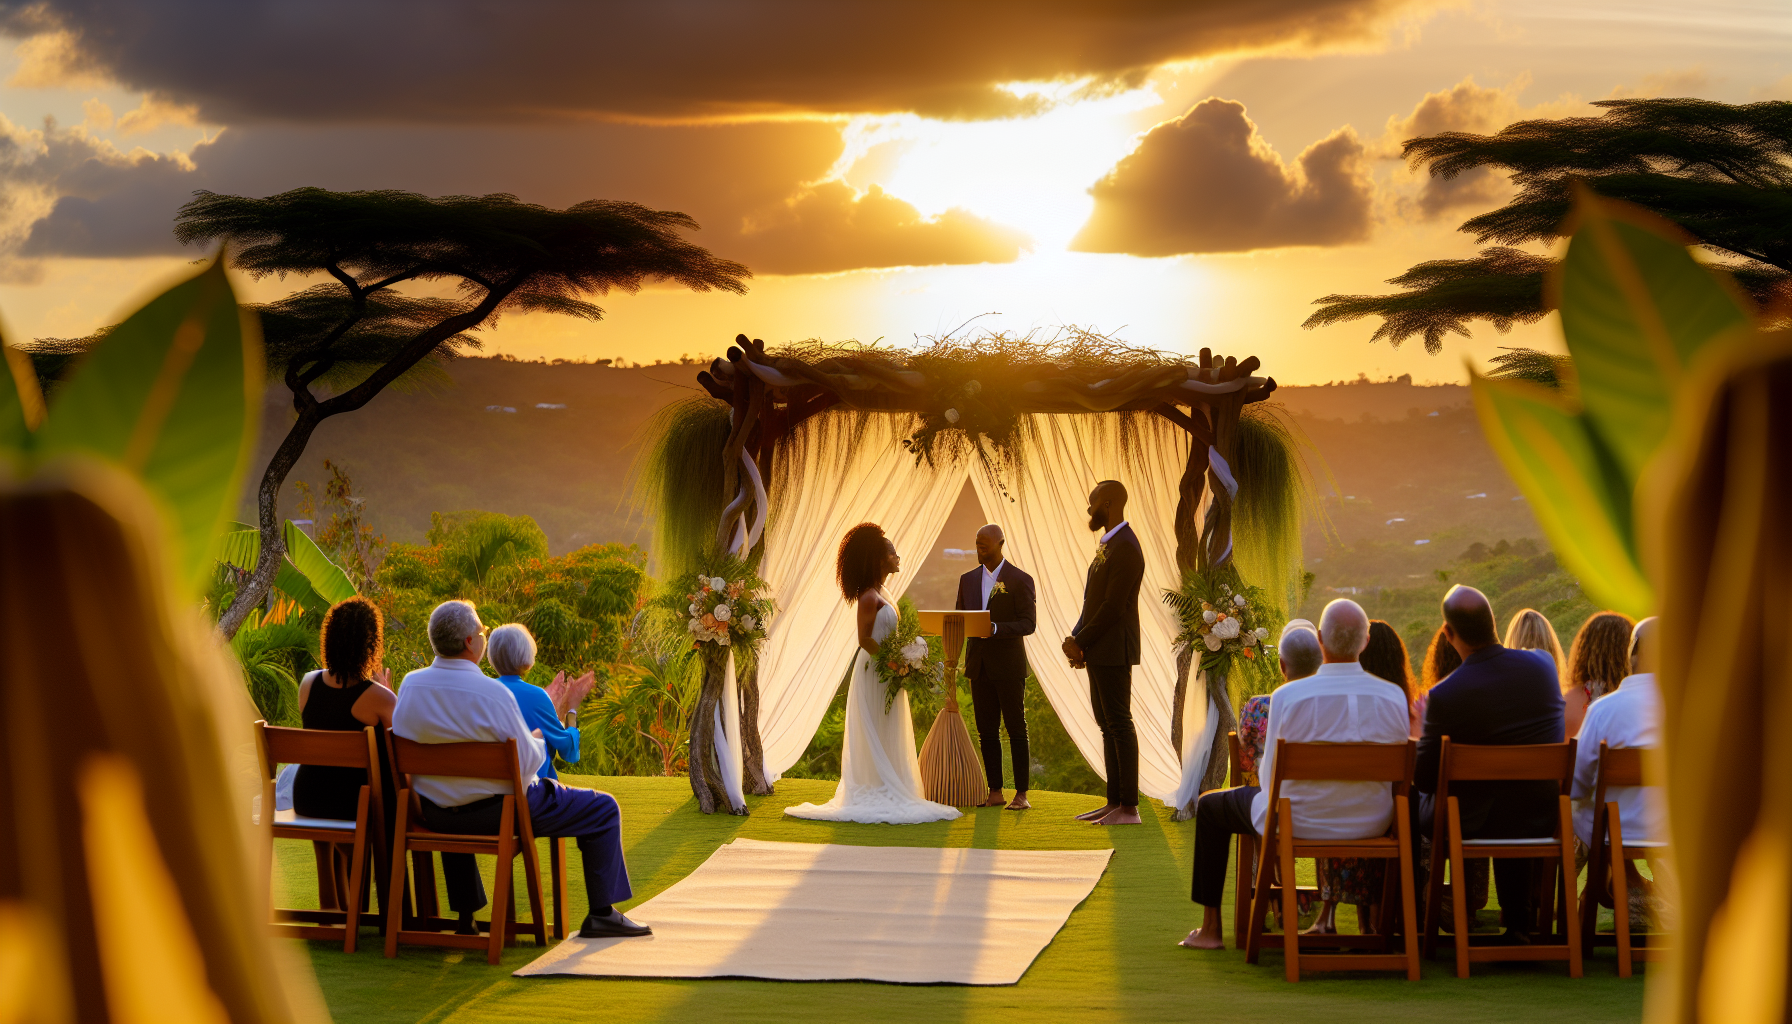 Discover seamless, sustainable destination weddings at Sunset at the Palms, Jamaica.